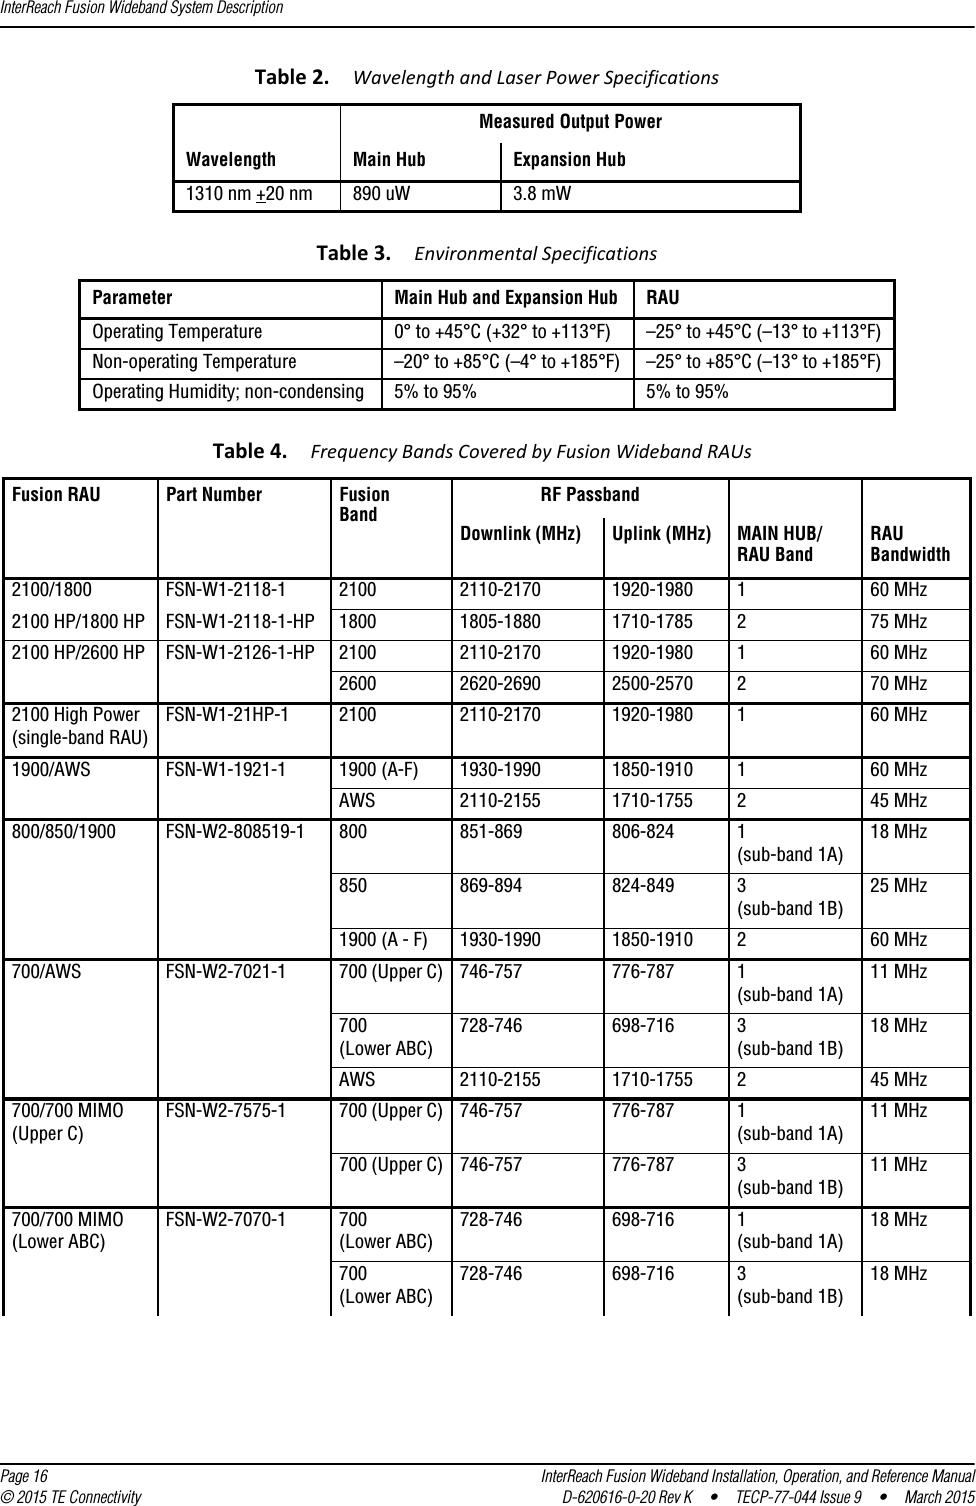 InterReach Fusion Wideband System Description  Page 16 InterReach Fusion Wideband Installation, Operation, and Reference Manual© 2015 TE Connectivity D-620616-0-20 Rev K  •  TECP-77-044 Issue 9  •  March 2015Table 2. Wavelength and Laser Power SpecificationsMeasured Output PowerWavelength Main Hub  Expansion Hub1310 nm +20 nm 890 uW 3.8 mWTable 3. Environmental SpecificationsParameter Main Hub and Expansion Hub RAUOperating Temperature  0° to +45°C (+32° to +113°F) –25° to +45°C (–13° to +113°F)Non-operating Temperature  –20° to +85°C (–4° to +185°F) –25° to +85°C (–13° to +185°F)Operating Humidity; non-condensing  5% to 95% 5% to 95%Table 4. Frequency Bands Covered by Fusion Wideband RAUs  Fusion RAU Part Number Fusion BandRF PassbandDownlink (MHz)  Uplink (MHz) MAIN HUB/ RAU BandRAU Bandwidth2100/1800 FSN-W1-2118-1 2100 2110-2170 1920-1980 1 60 MHz2100 HP/1800 HP FSN-W1-2118-1-HP 1800 1805-1880 1710-1785 2 75 MHz2100 HP/2600 HP FSN-W1-2126-1-HP 2100 2110-2170 1920-1980 1 60 MHz2600 2620-2690 2500-2570 2 70 MHz2100 High Power(single-band RAU)FSN-W1-21HP-1 2100 2110-2170 1920-1980 1 60 MHz1900/AWS FSN-W1-1921-1 1900 (A-F) 1930-1990 1850-1910 1 60 MHzAWS 2110-2155 1710-1755 2 45 MHz800/850/1900 FSN-W2-808519-1 800 851-869 806-824 1 (sub-band 1A)18 MHz850 869-894 824-849 3 (sub-band 1B)25 MHz1900 (A - F) 1930-1990 1850-1910 2 60 MHz700/AWS FSN-W2-7021-1 700 (Upper C) 746-757 776-787 1 (sub-band 1A)11 MHz700 (Lower ABC)728-746 698-716 3 (sub-band 1B)18 MHzAWS 2110-2155 1710-1755 2 45 MHz700/700 MIMO (Upper C)FSN-W2-7575-1 700 (Upper C) 746-757 776-787 1 (sub-band 1A)11 MHz700 (Upper C) 746-757 776-787 3 (sub-band 1B)11 MHz700/700 MIMO (Lower ABC)FSN-W2-7070-1 700 (Lower ABC)728-746 698-716 1 (sub-band 1A)18 MHz700 (Lower ABC)728-746 698-716 3 (sub-band 1B)18 MHz